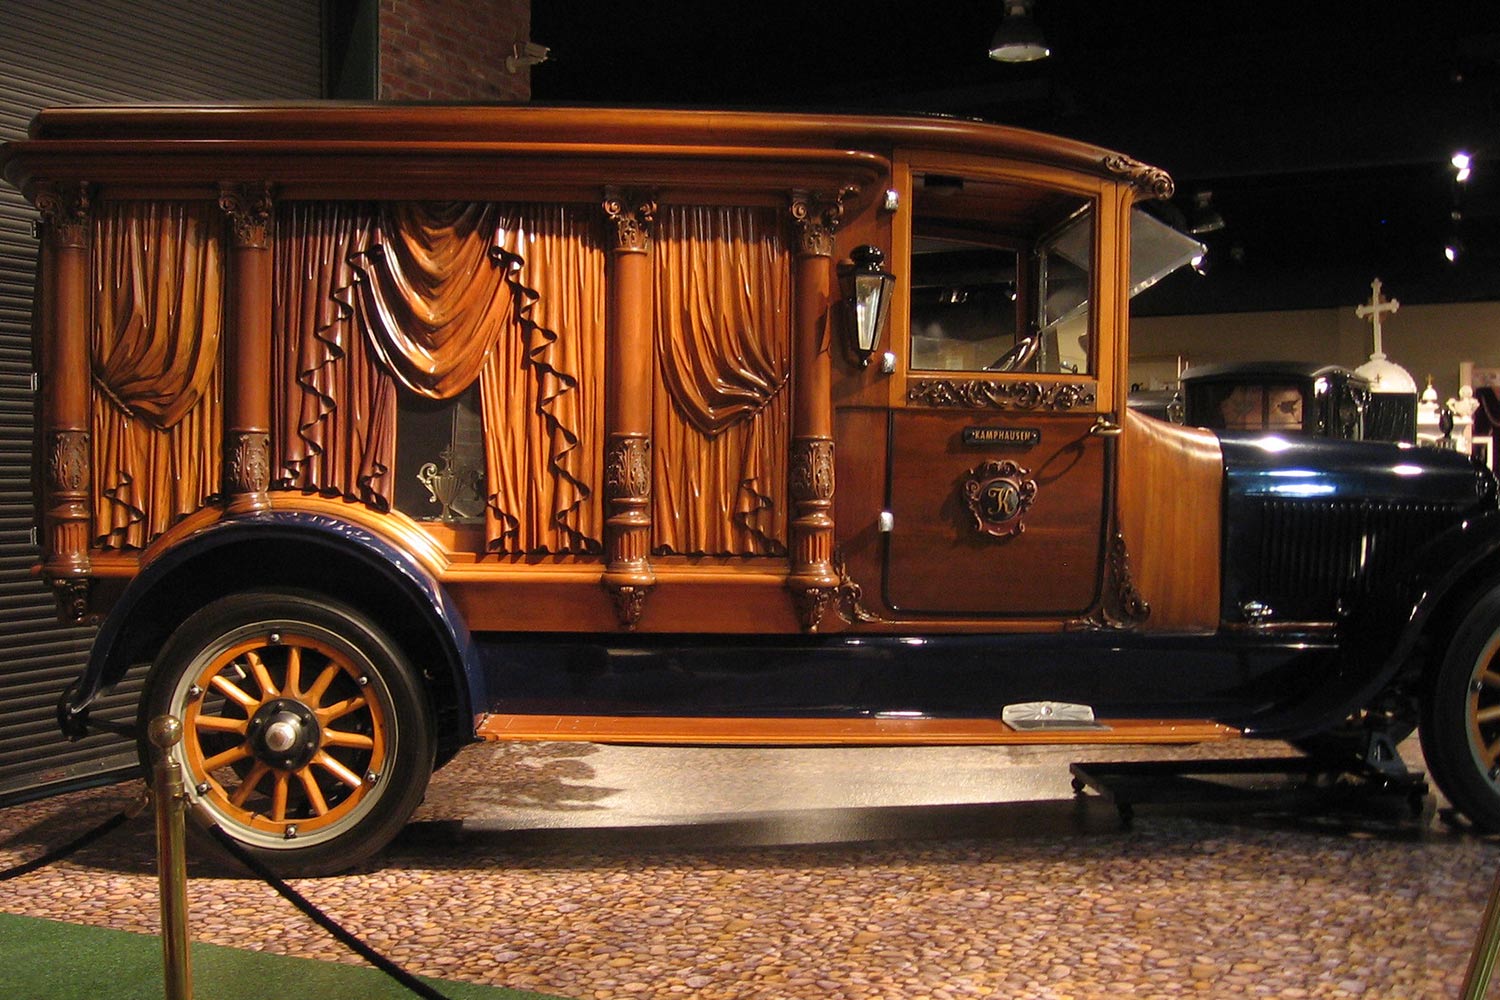 A vintage 1921 wood carved hearse